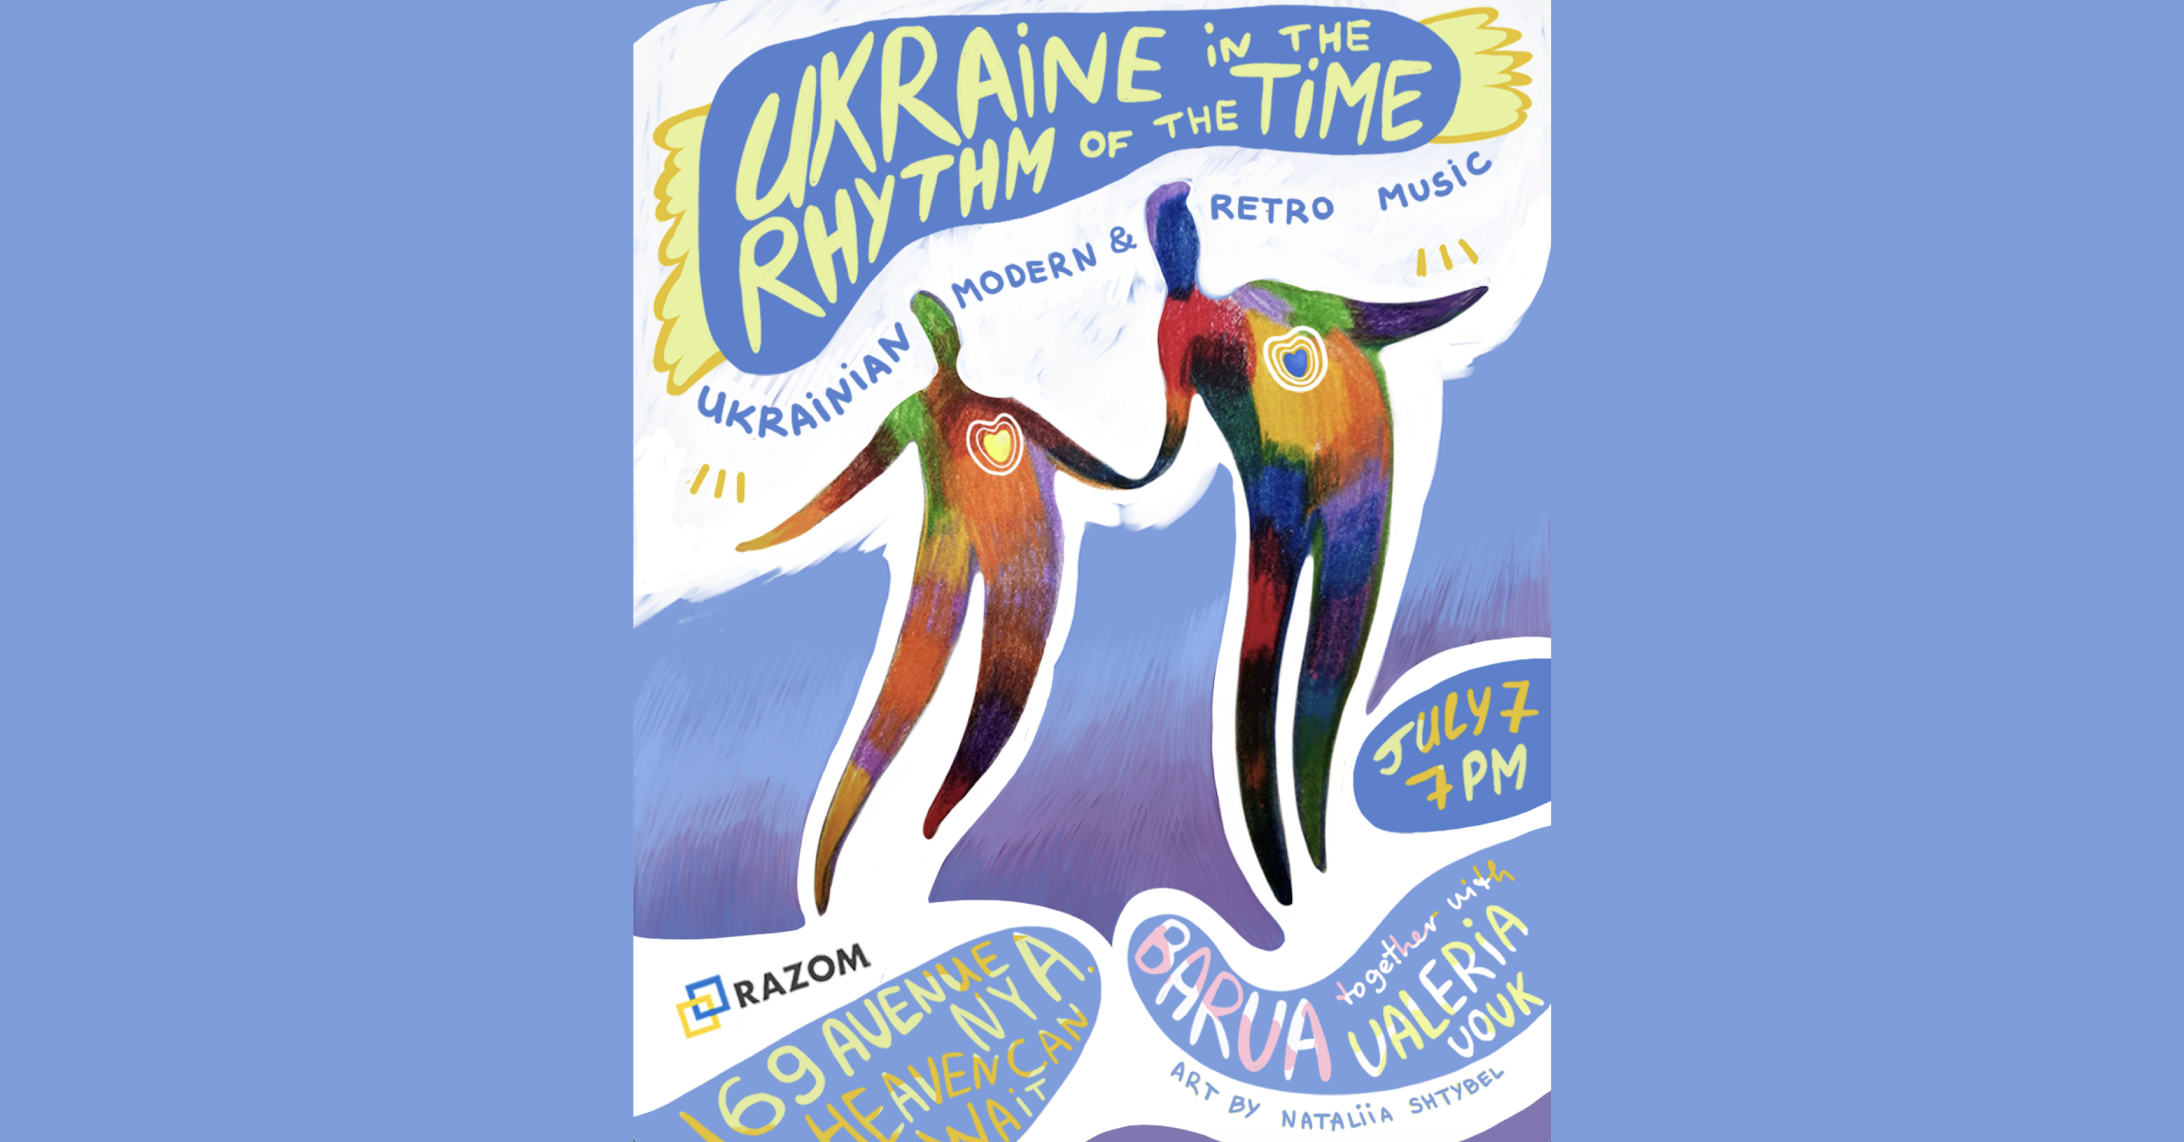 “Ukraine in the Rhythm of Time,” featuring Barva and Valeria Vovk